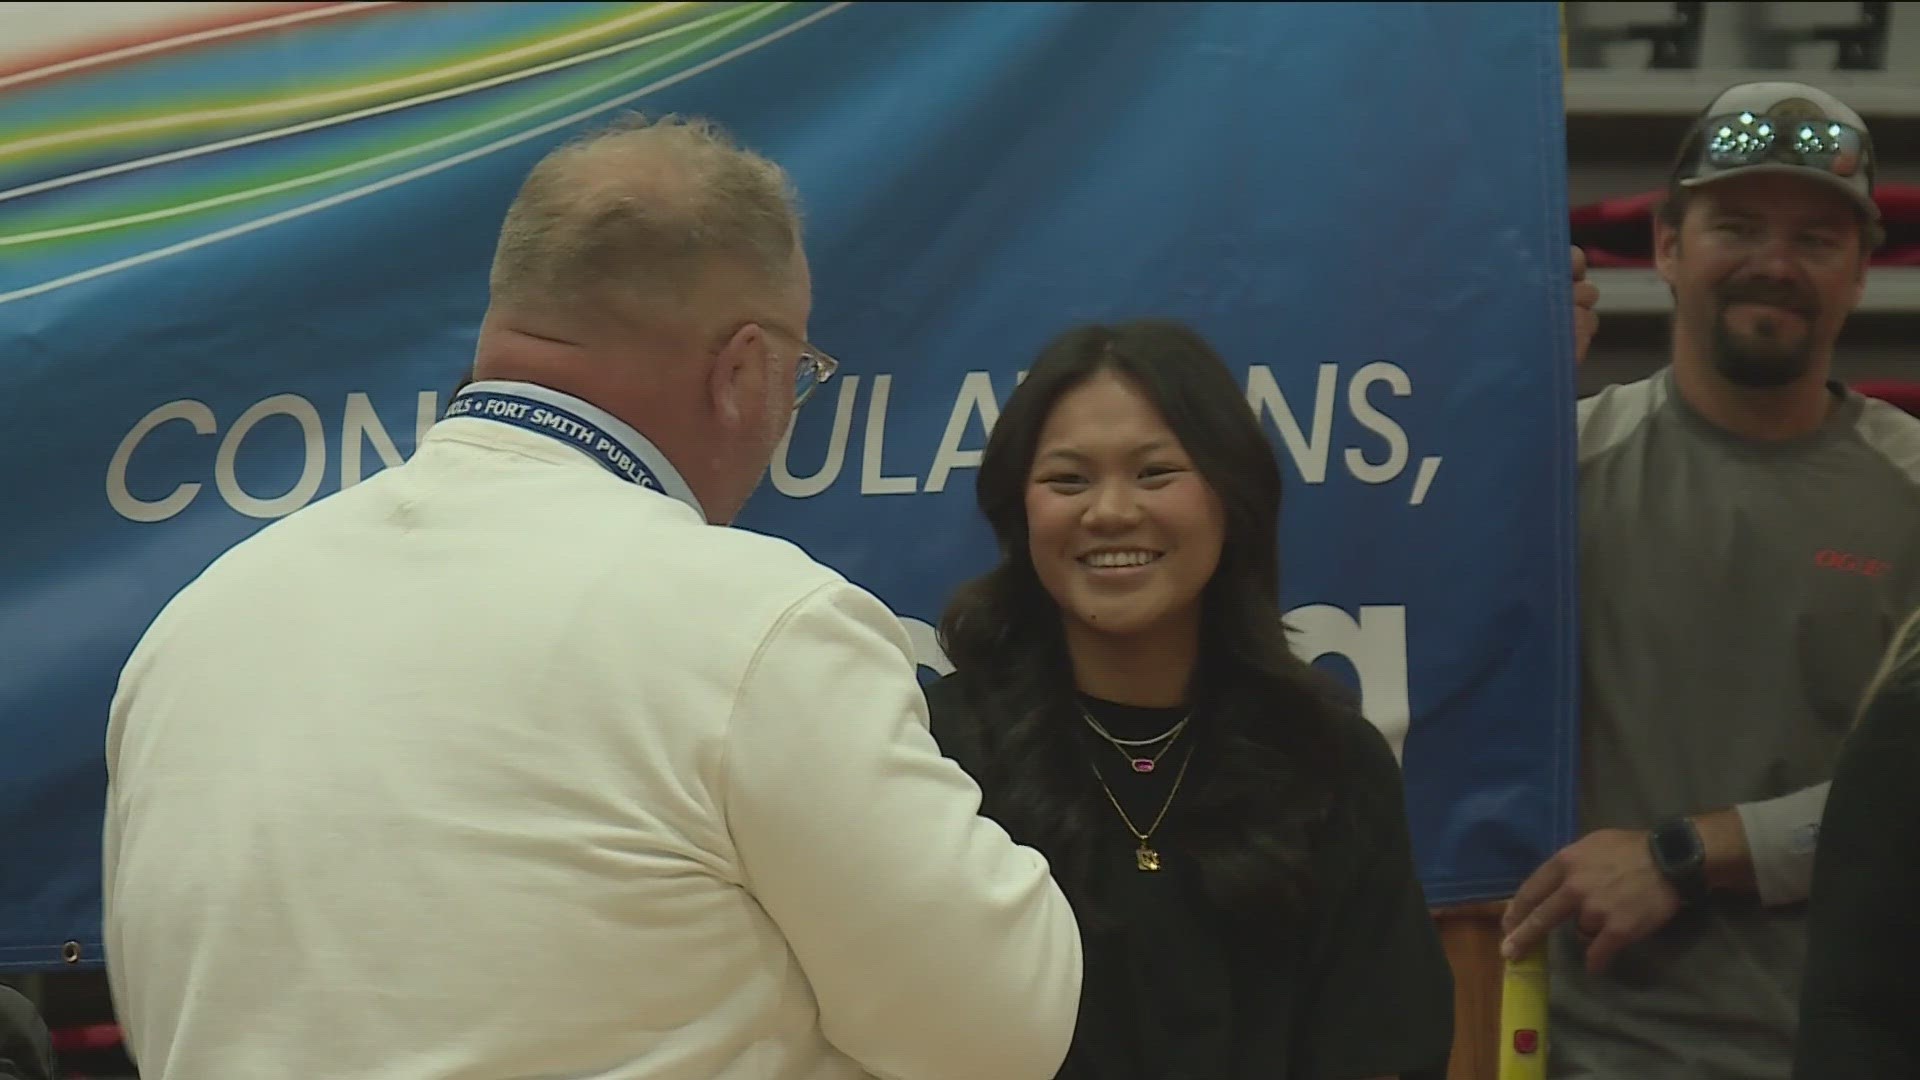 A FORT SMITH HIGH SCHOOL SENIOR-- RECEIVING A BIG SURPRISE WHEN SHE WALKED INTO CLASS THIS MORNING... AND LEARNED SHE'S GETTING A $60,000 COLLEGE SCHOLARSHIP...